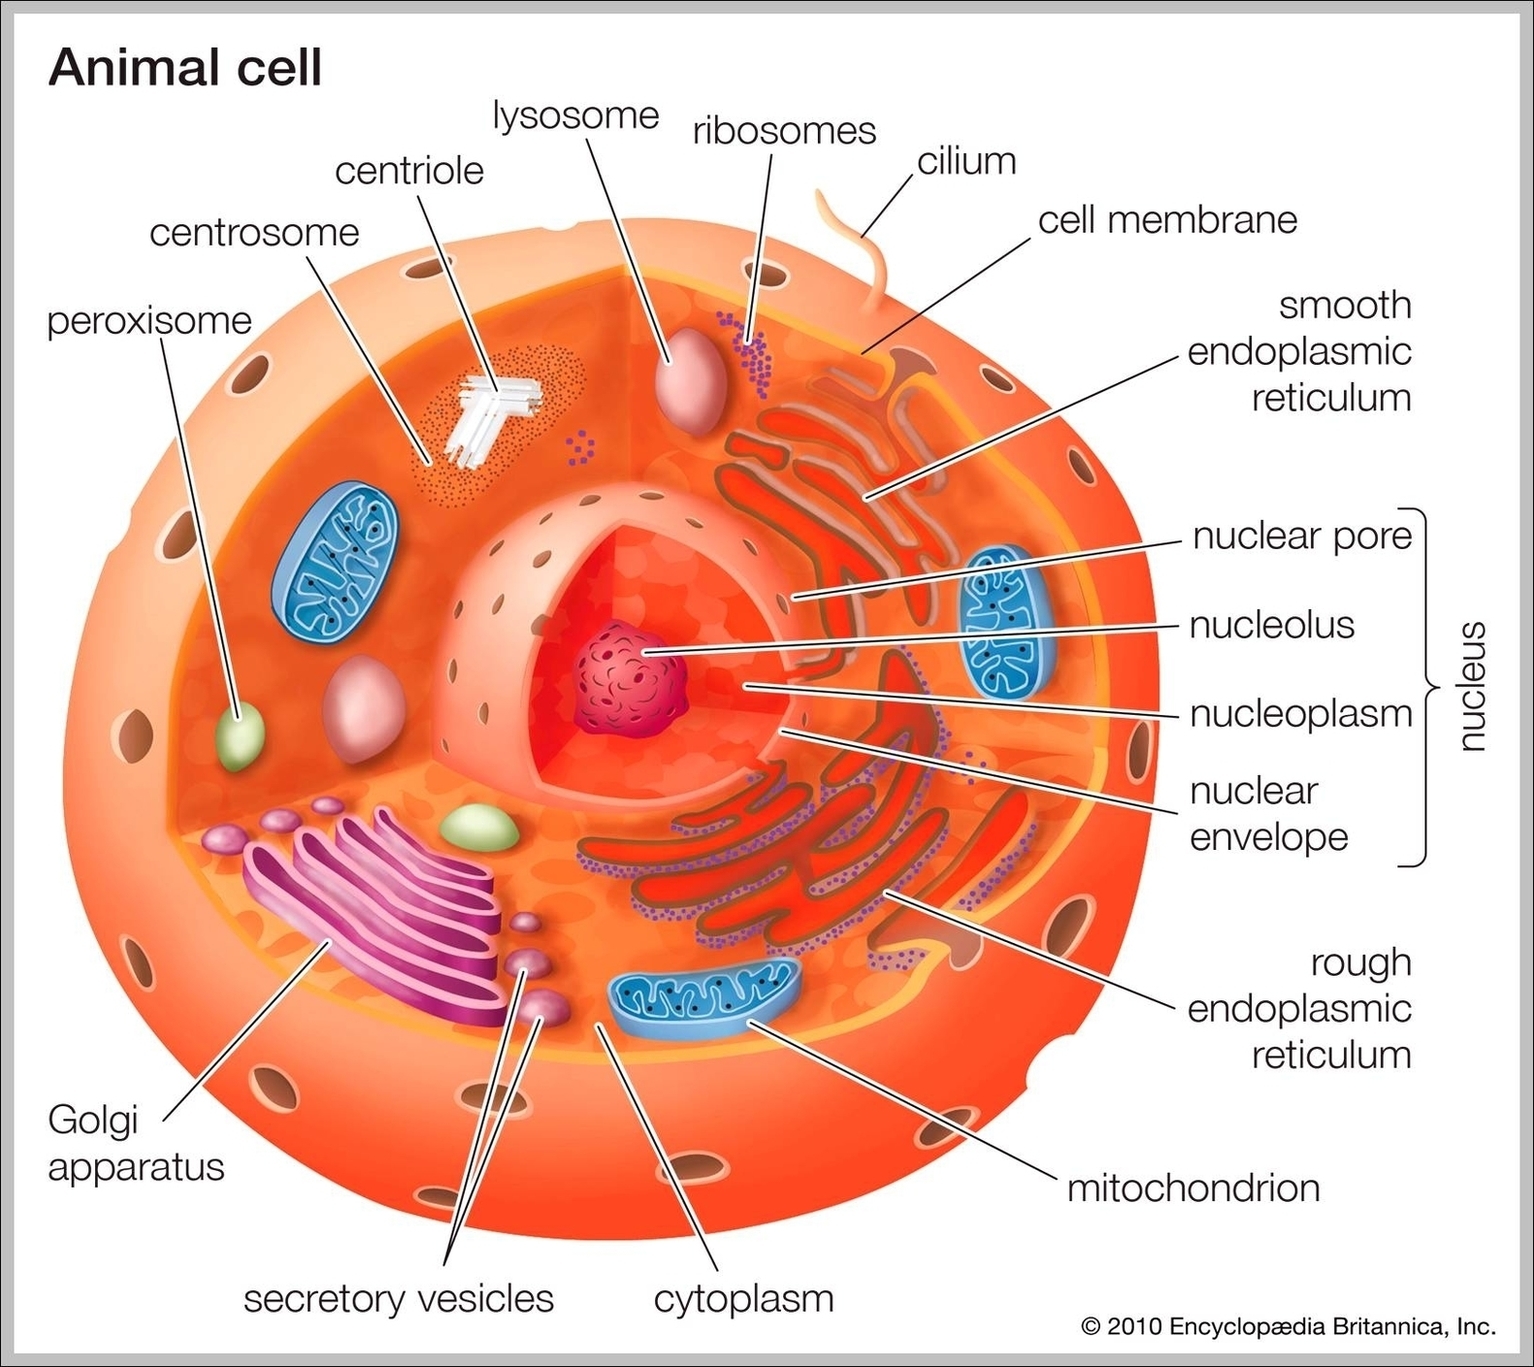 Pictures Of An Animal Cell With Labels Image